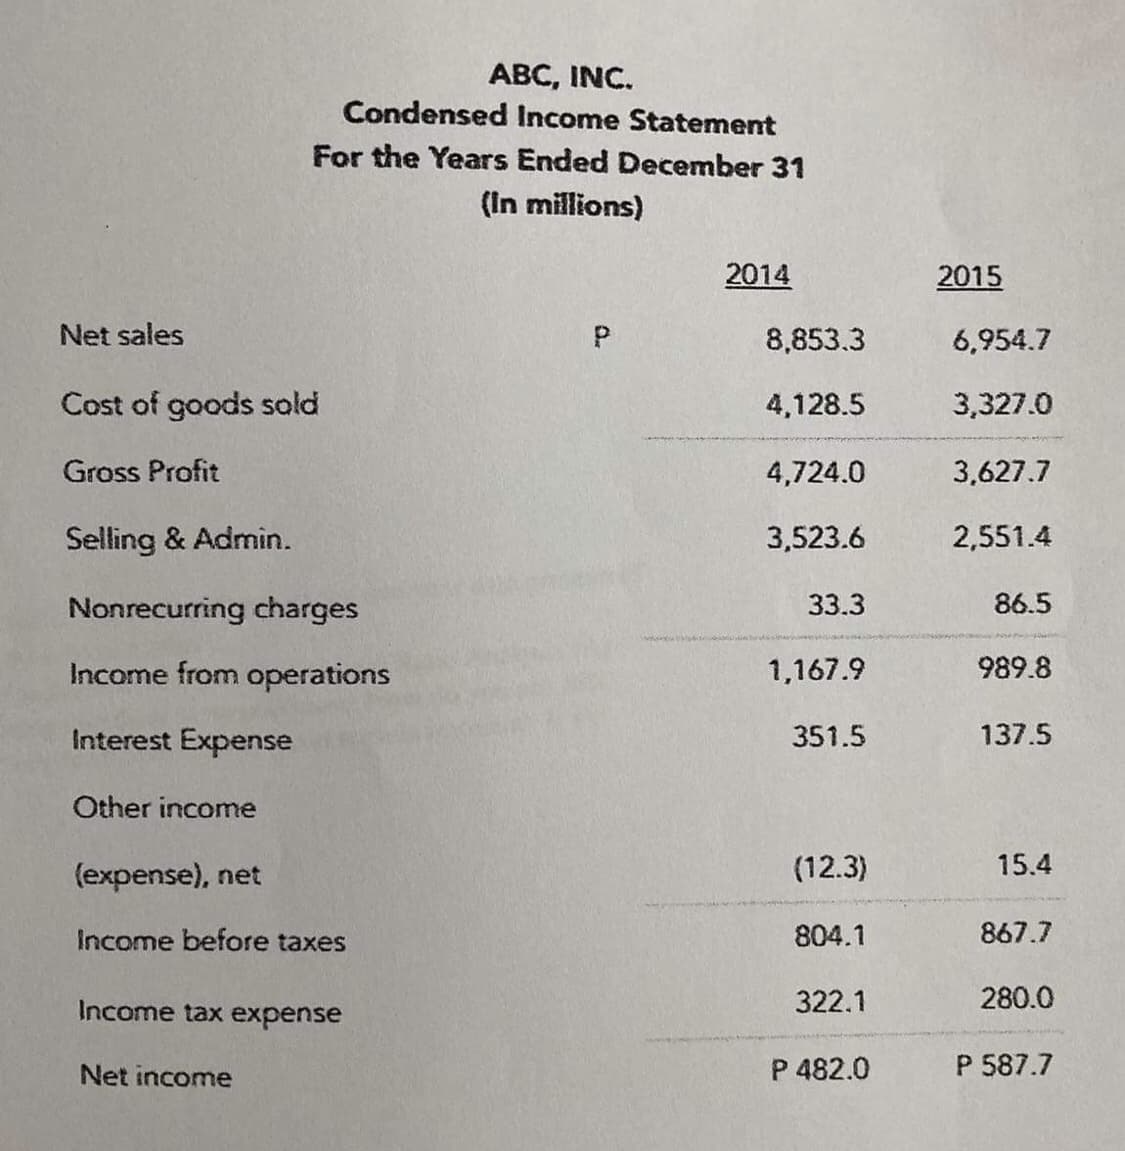 ABC, INC.
Condensed Income Statement
For the Years Ended December 31
(In millions)
2014
2015
Net sales
8,853.3
6,954.7
Cost of goods sold
4,128.5
3,327.0
Gross Profit
4,724.0
3,627.7
Selling & Admin.
3,523.6
2,551.4
Nonrecurring charges
33.3
86.5
Income from operations
1,167.9
989.8
Interest Expense
351.5
137.5
Other income
(expense), net
(12.3)
15.4
Income before taxes
804.1
867.7
Income tax expense
322.1
280.0
Net income
P 482.0
P 587.7
